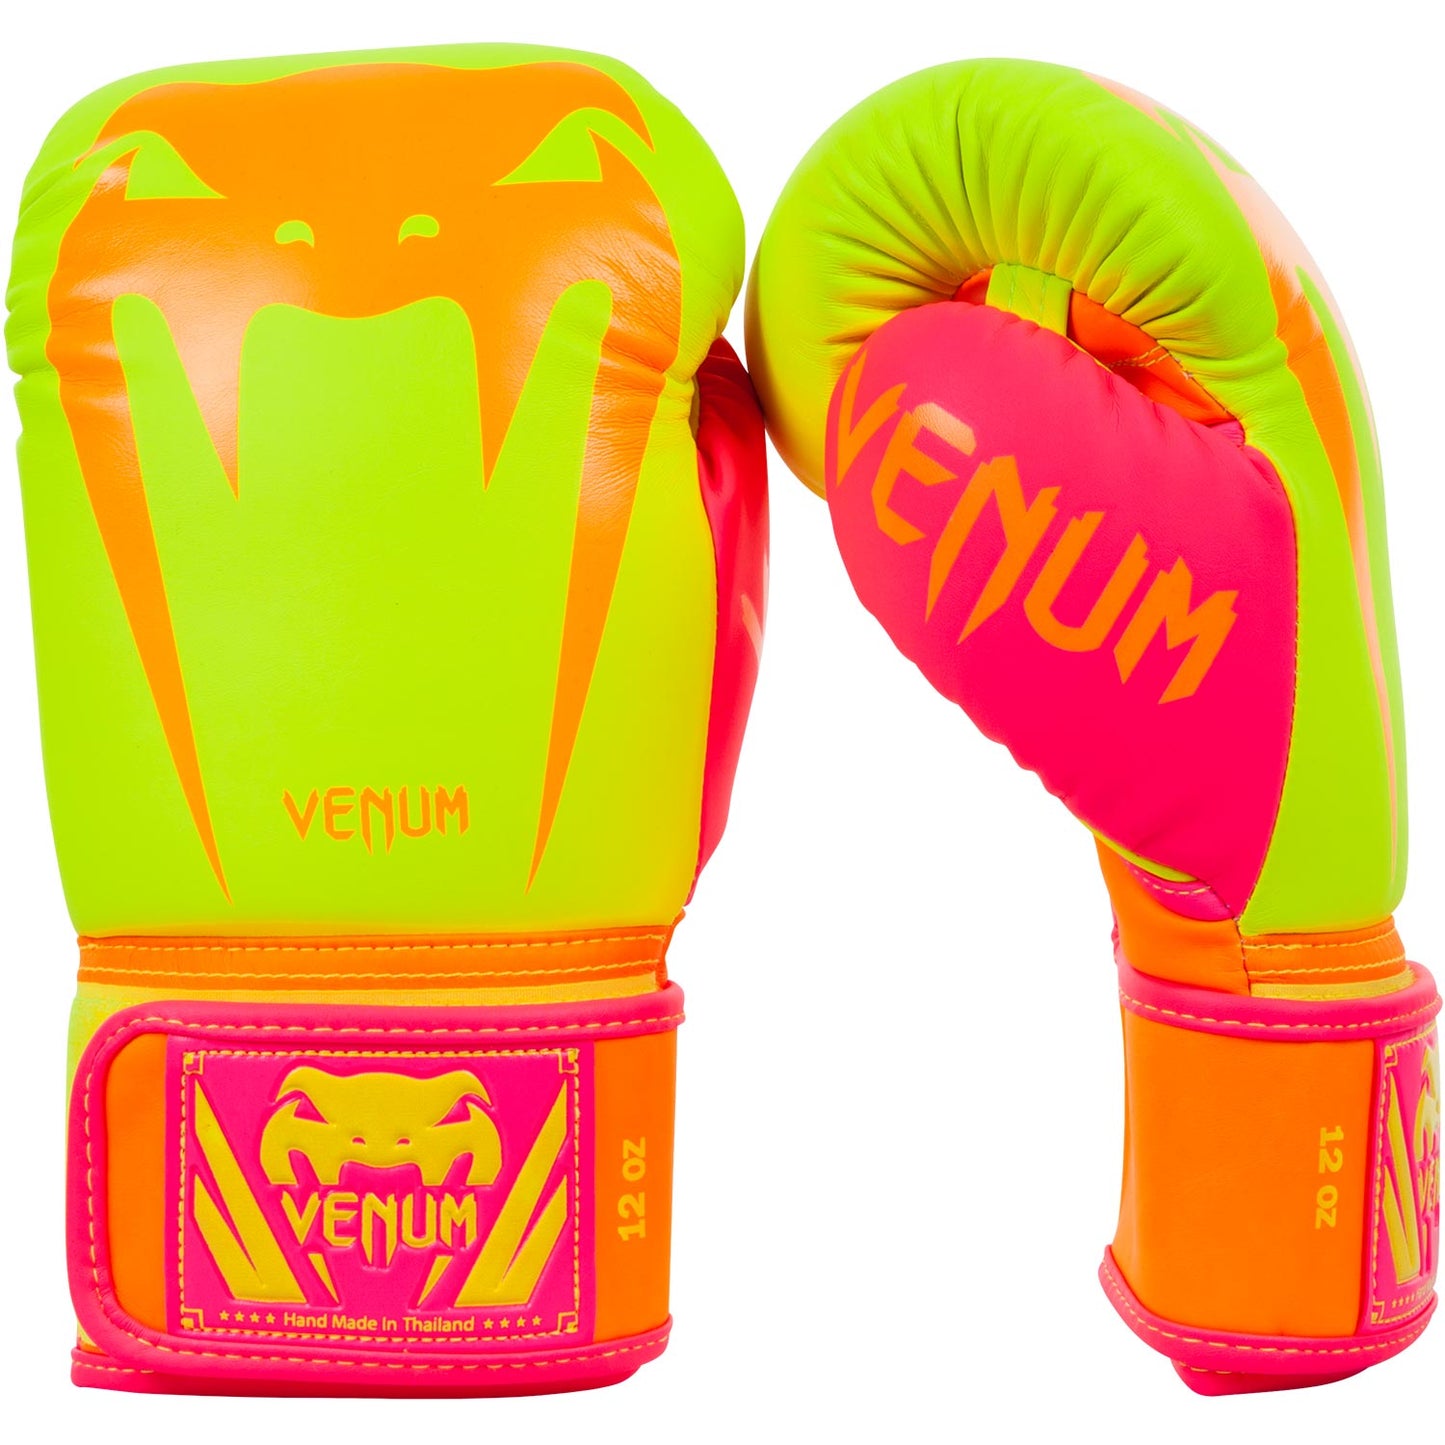 Venum Giant 3.0 Farben Limited Edition Boxhandschuhe